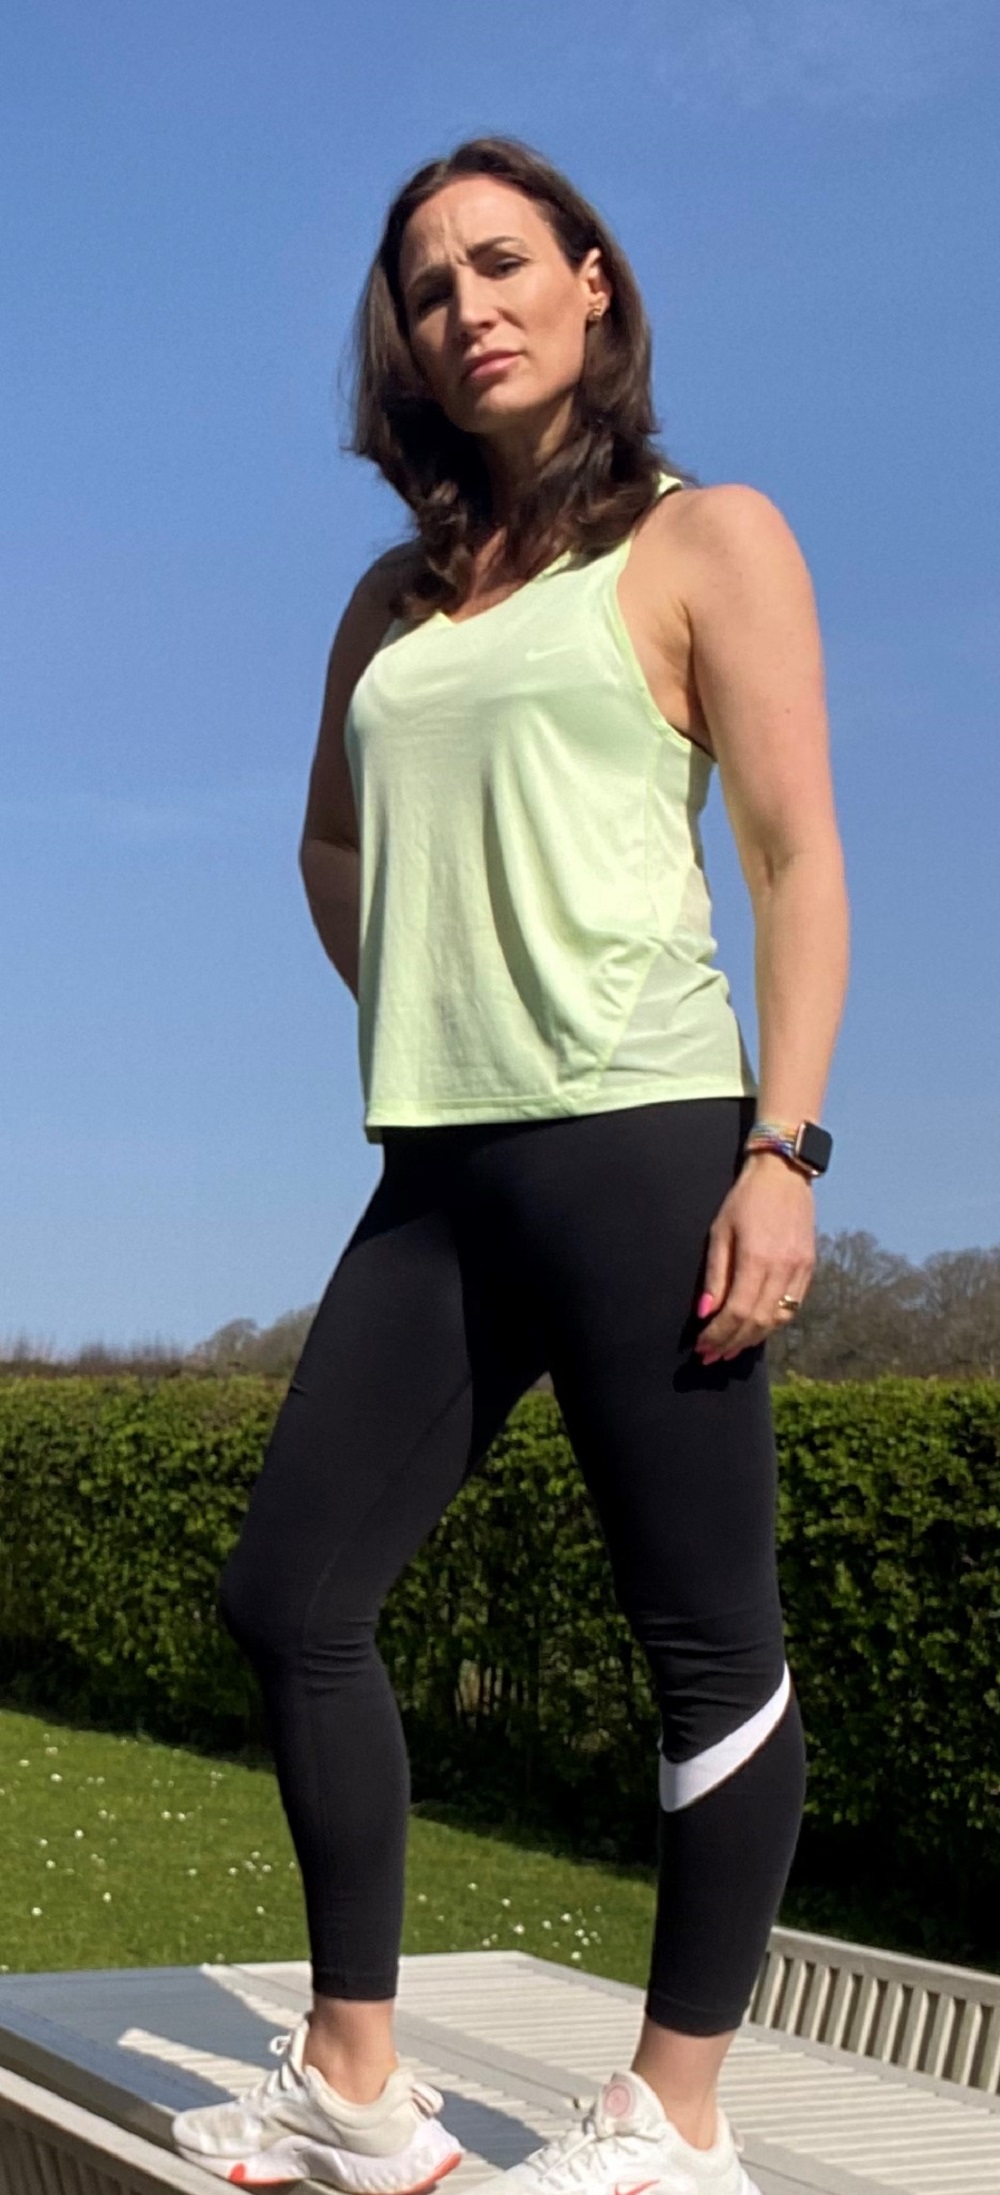 Woman posing and wearing a green top